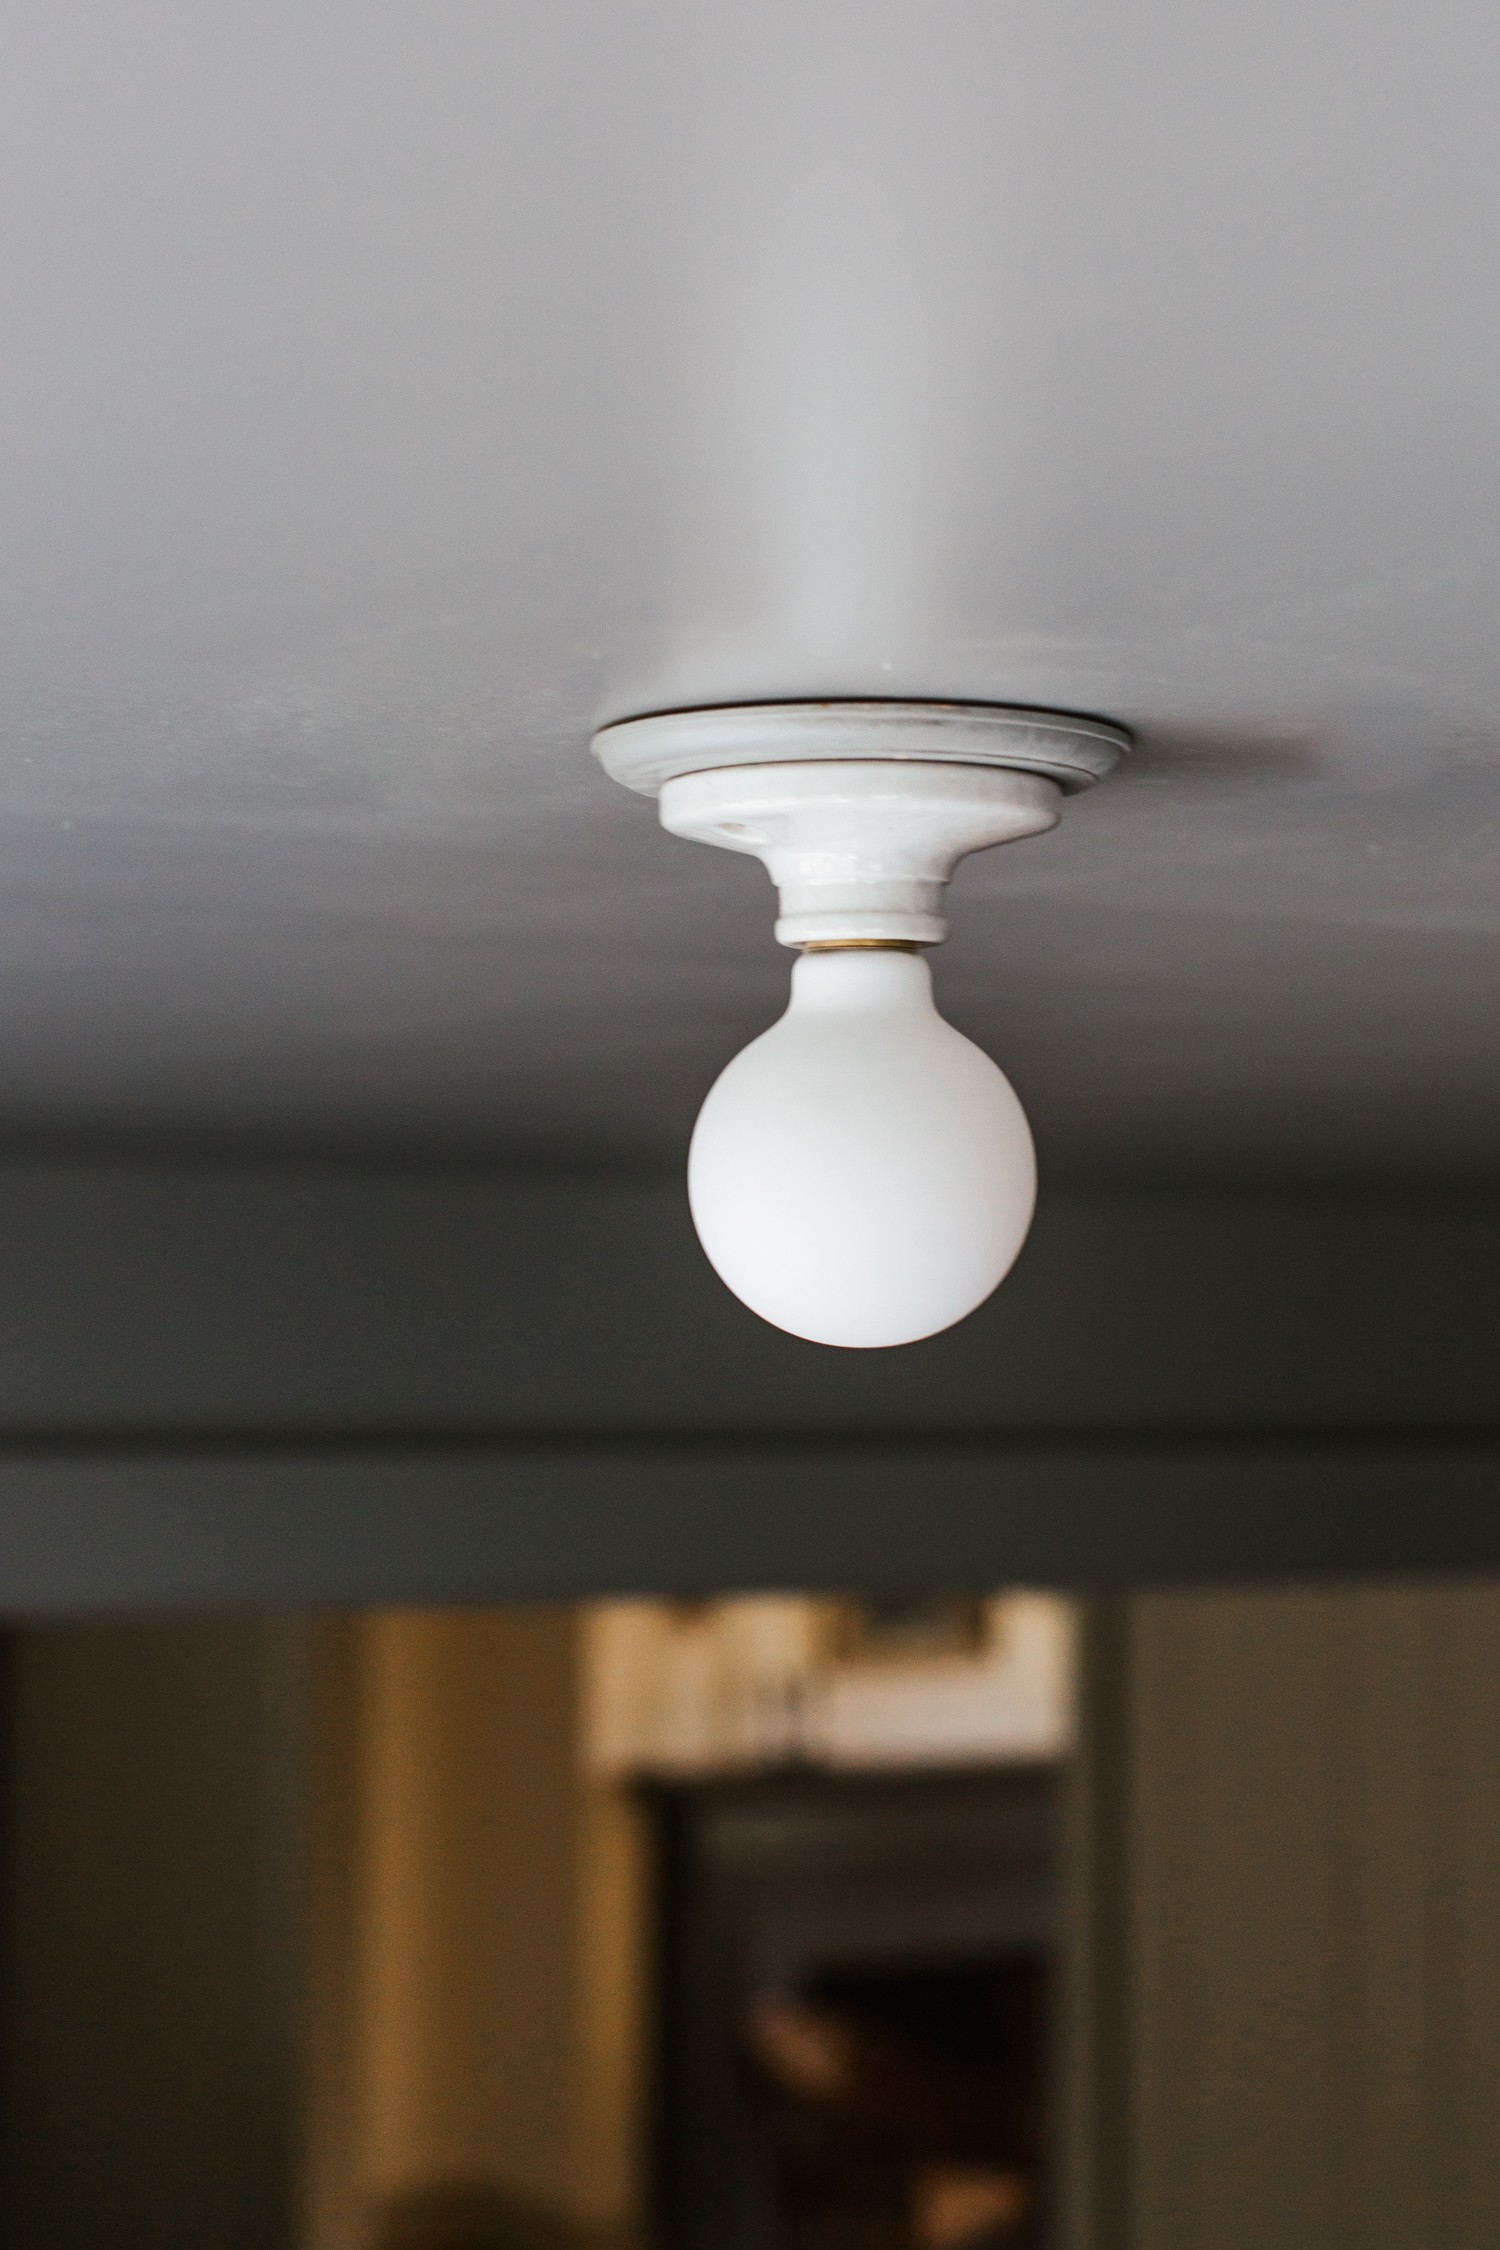 a close up of a light fixture on a ceiling